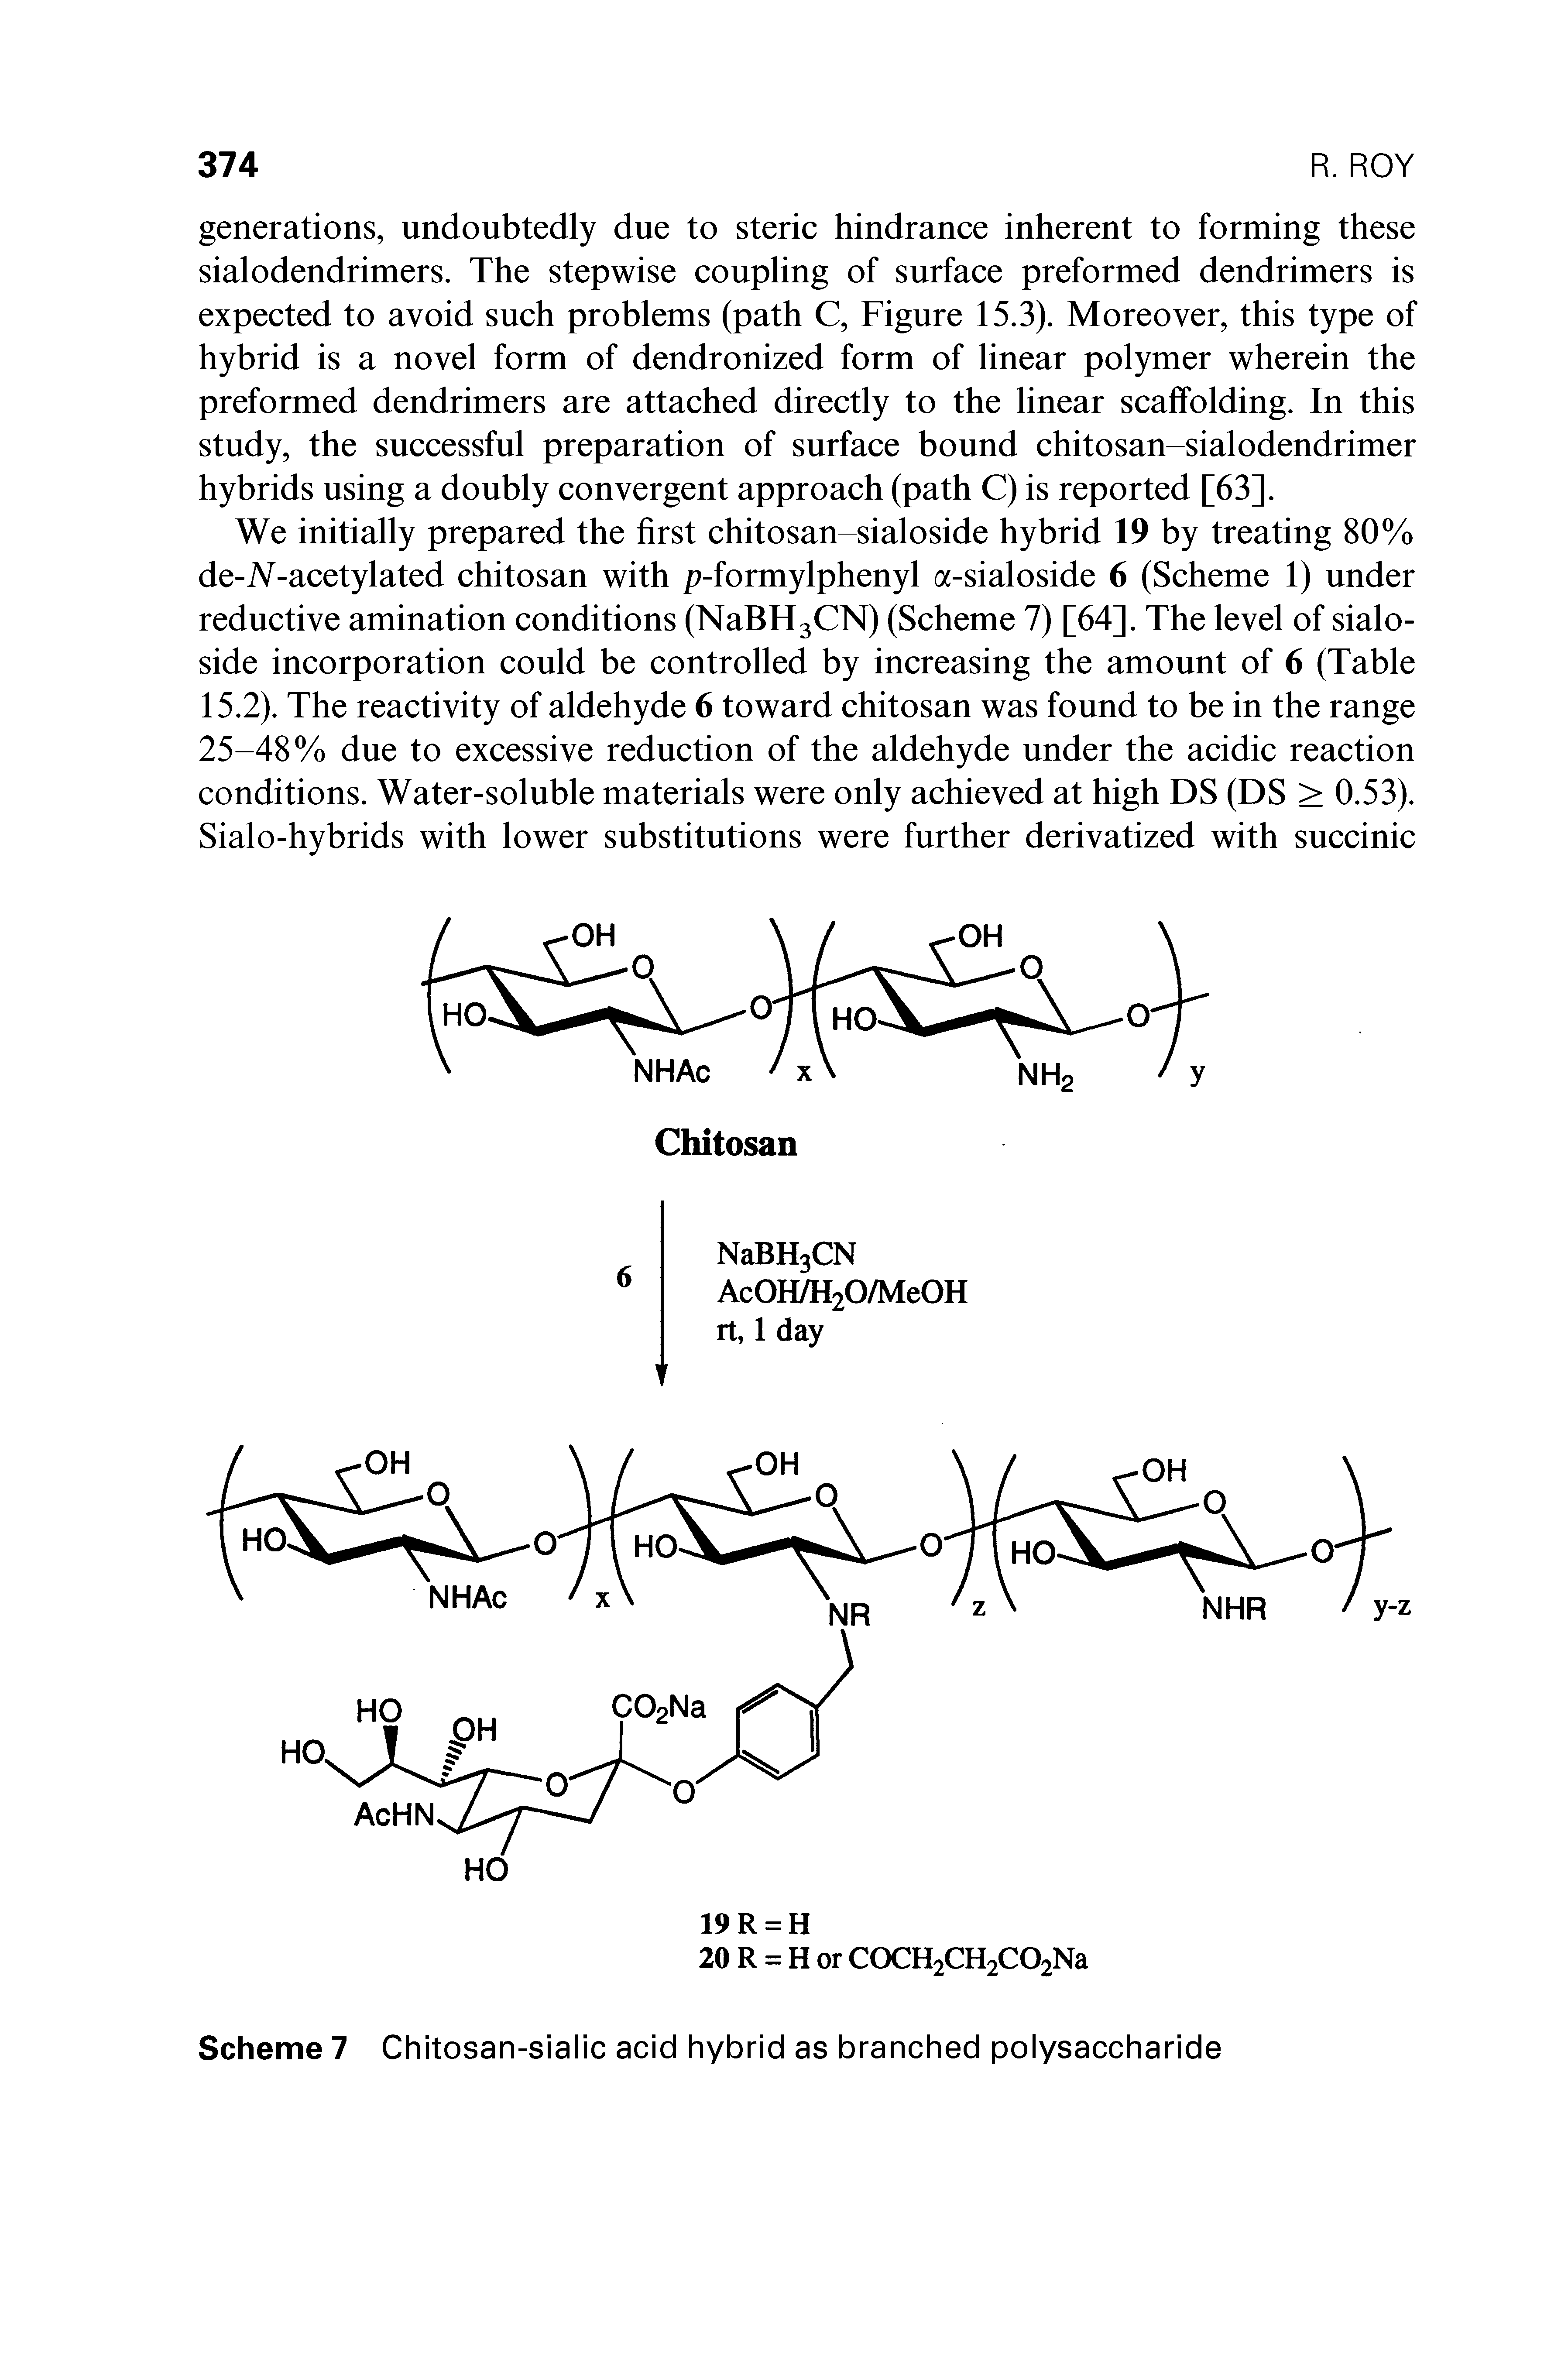 Scheme 7 Chitosan-sialic acid hybrid as branched polysaccharide...